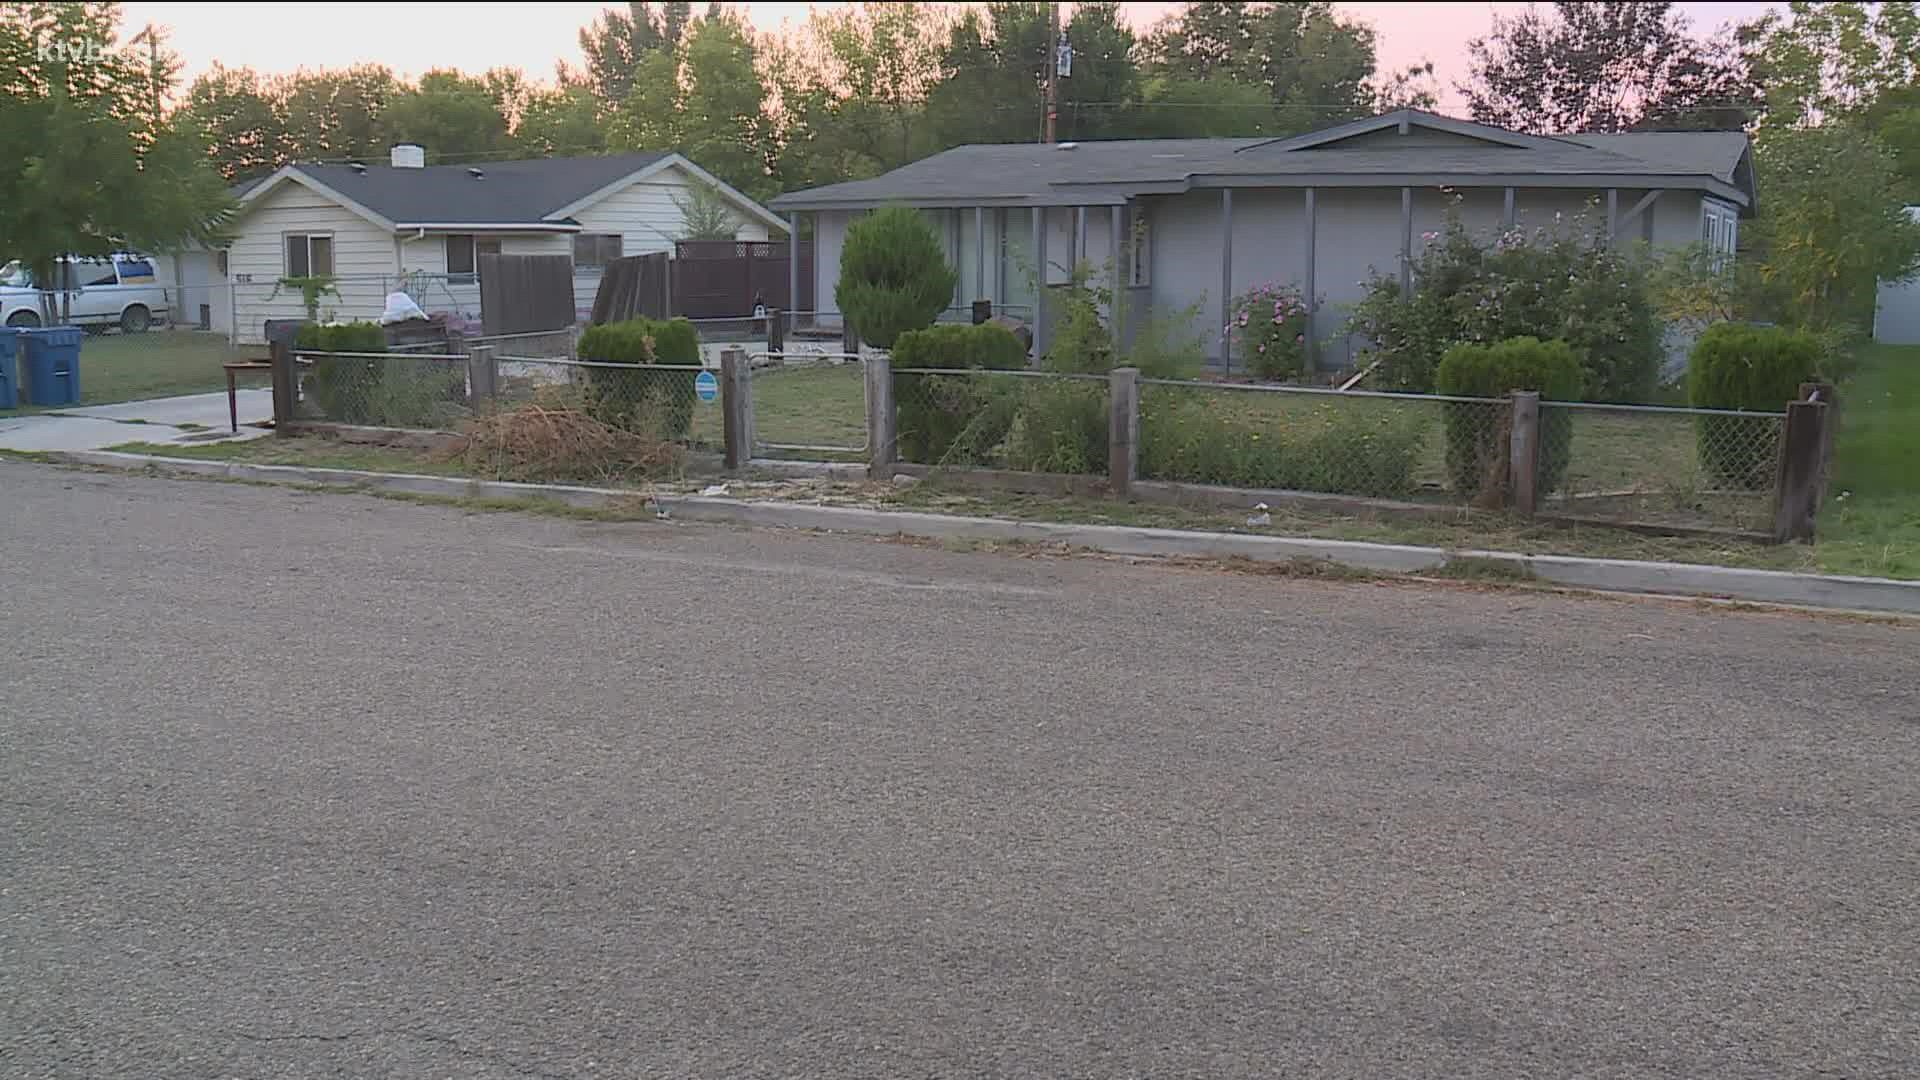 One teen was injured in a drive-by shooting while at a party at a vacant property on Saturday. Another was struck by a vehicle that was leaving the scene.